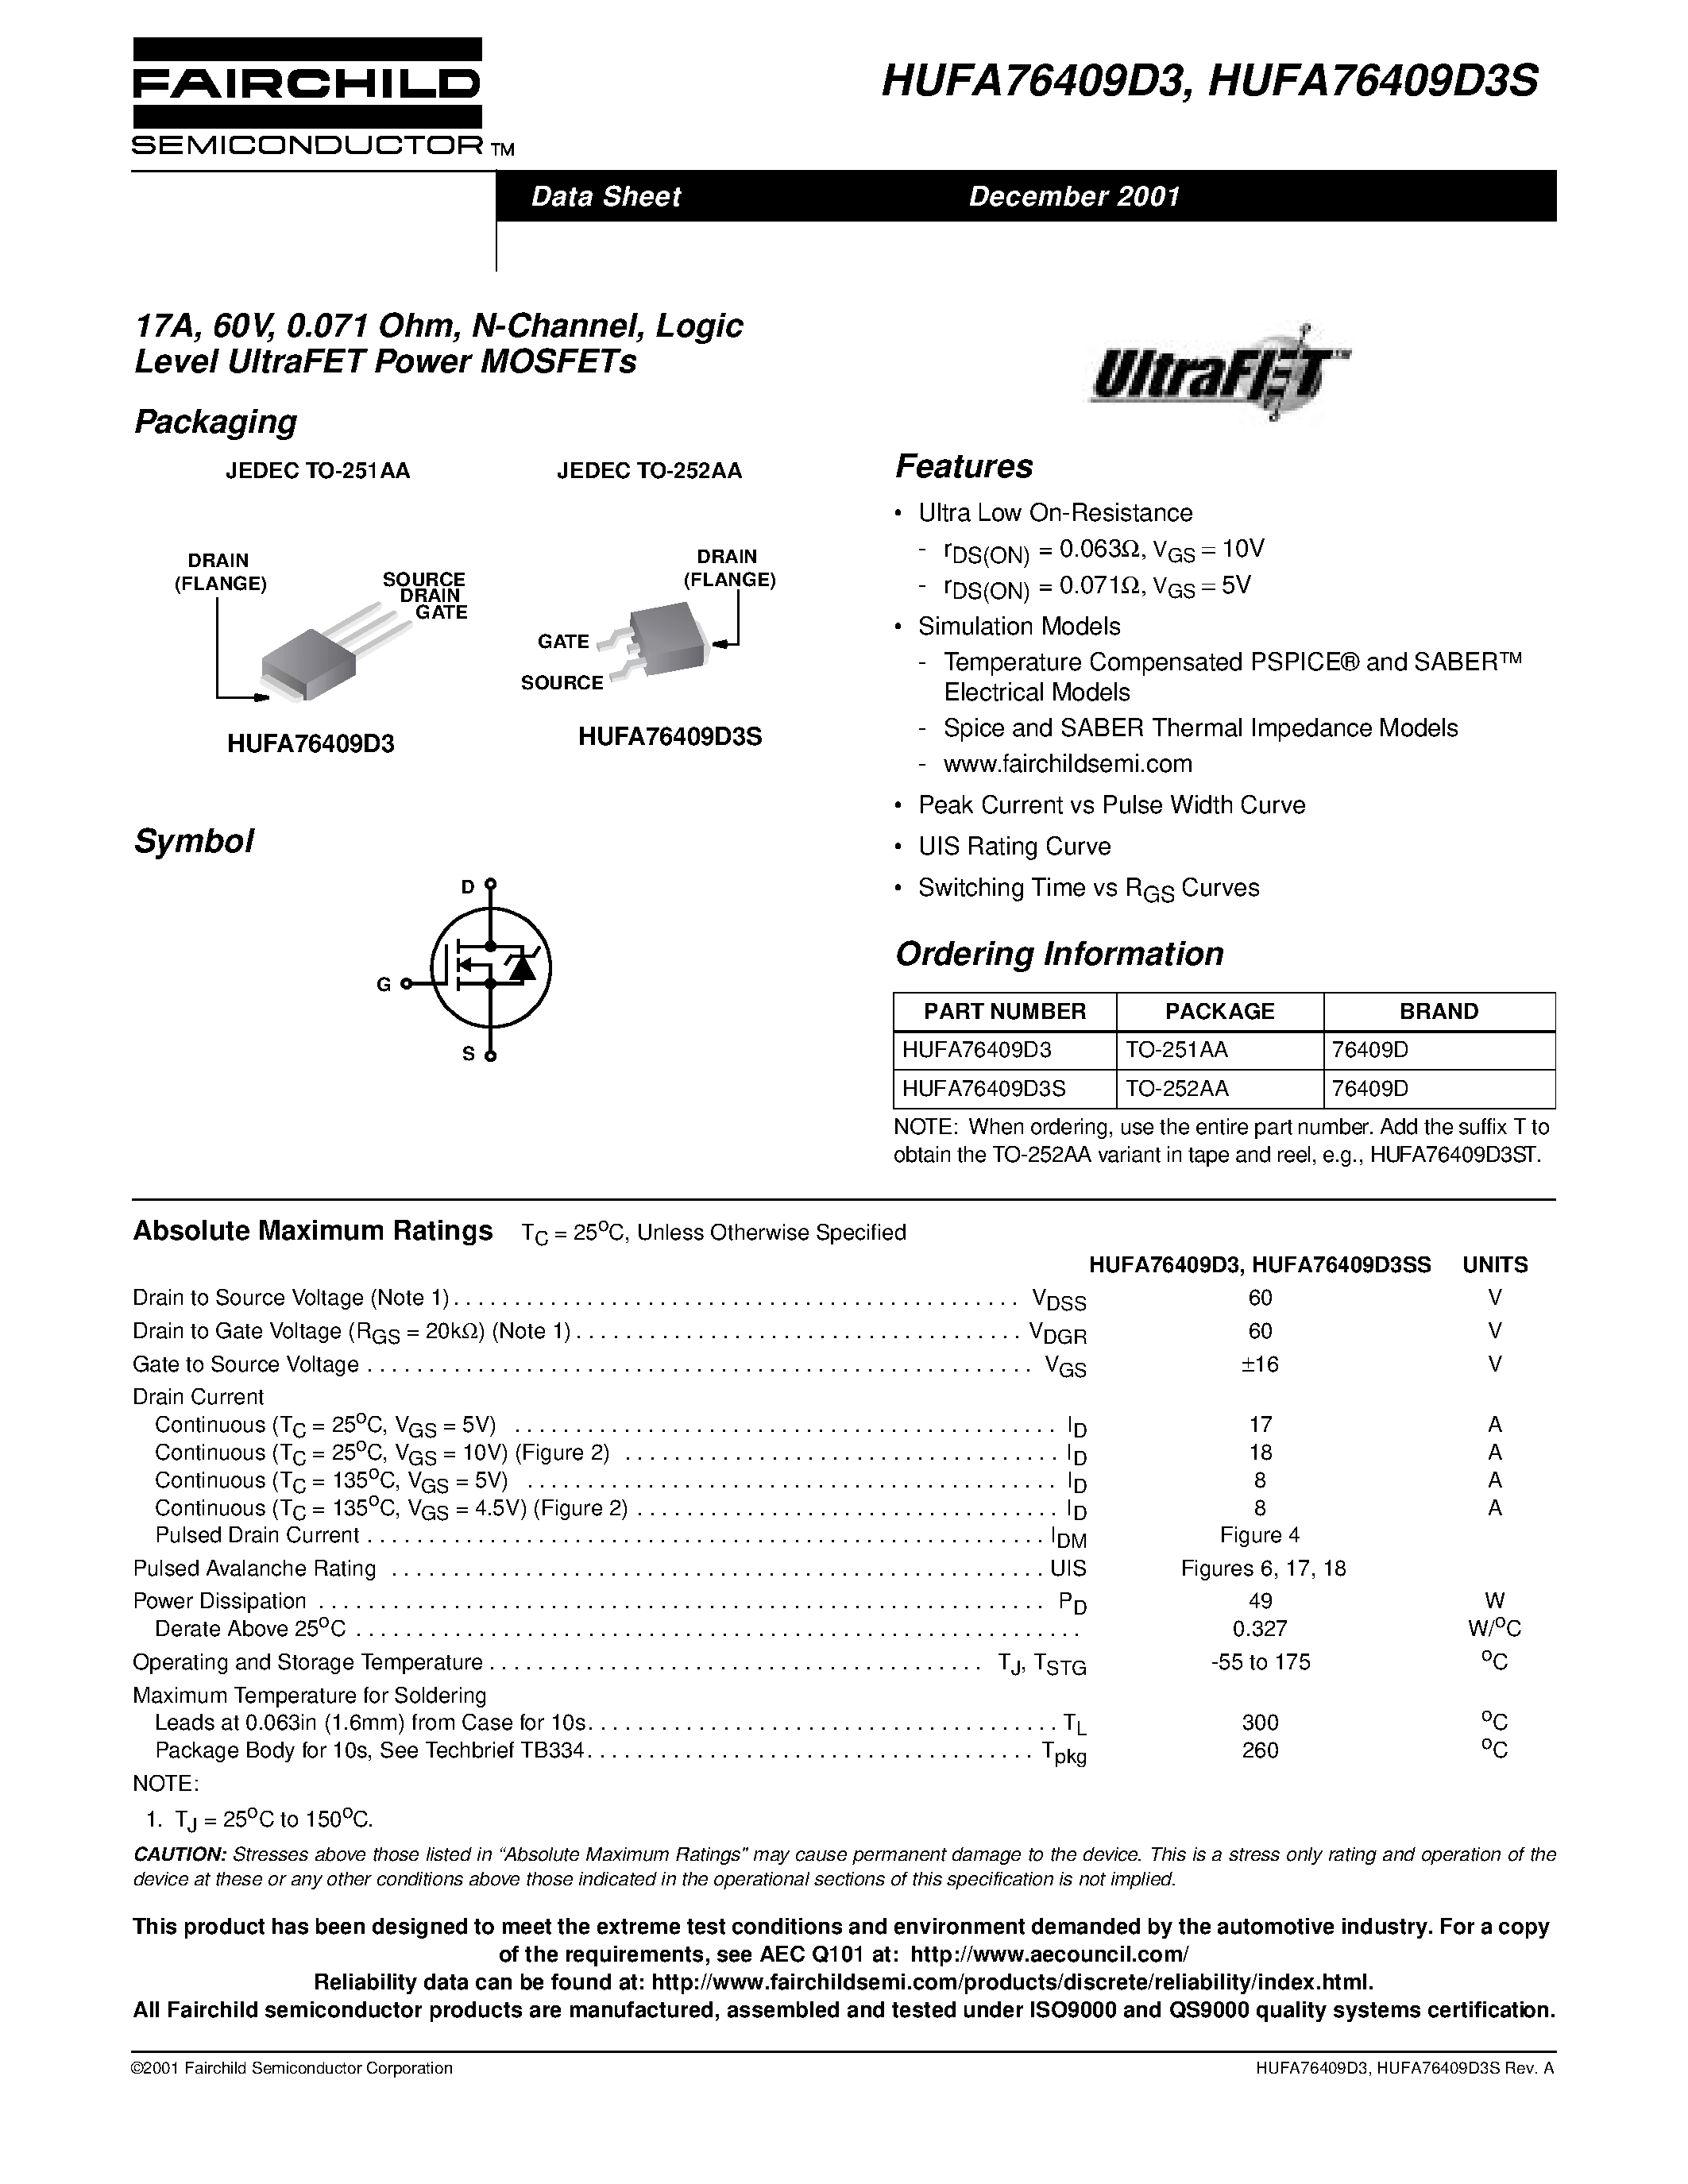 Datasheet HUFA76409D3 - 17A/ 60V/ 0.071 Ohm/ N-Channel/ Logic Level UltraFET Power MOSFETs page 1